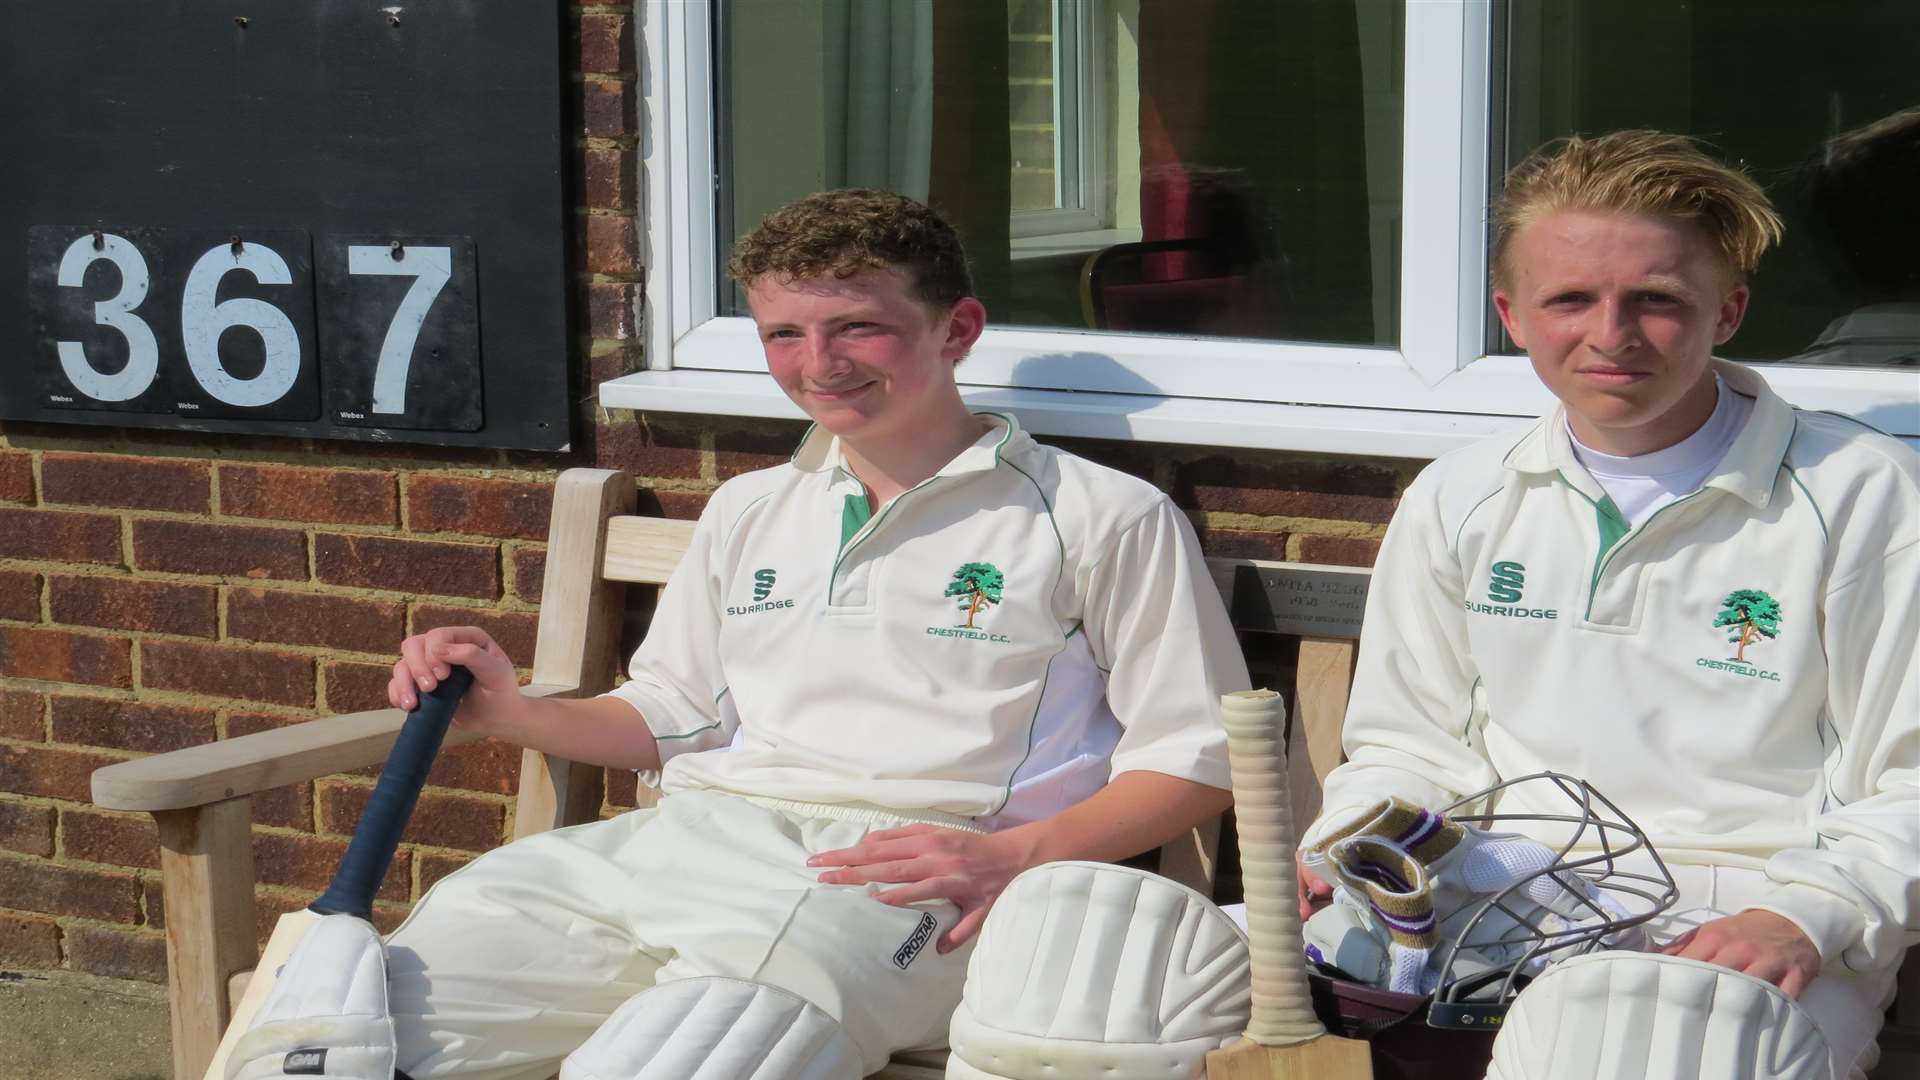 Ben Carpenter-Friend, left, and Tom Barton put on 337 not out for Chestfield 2nds against Harvel Picture: Laura Friend